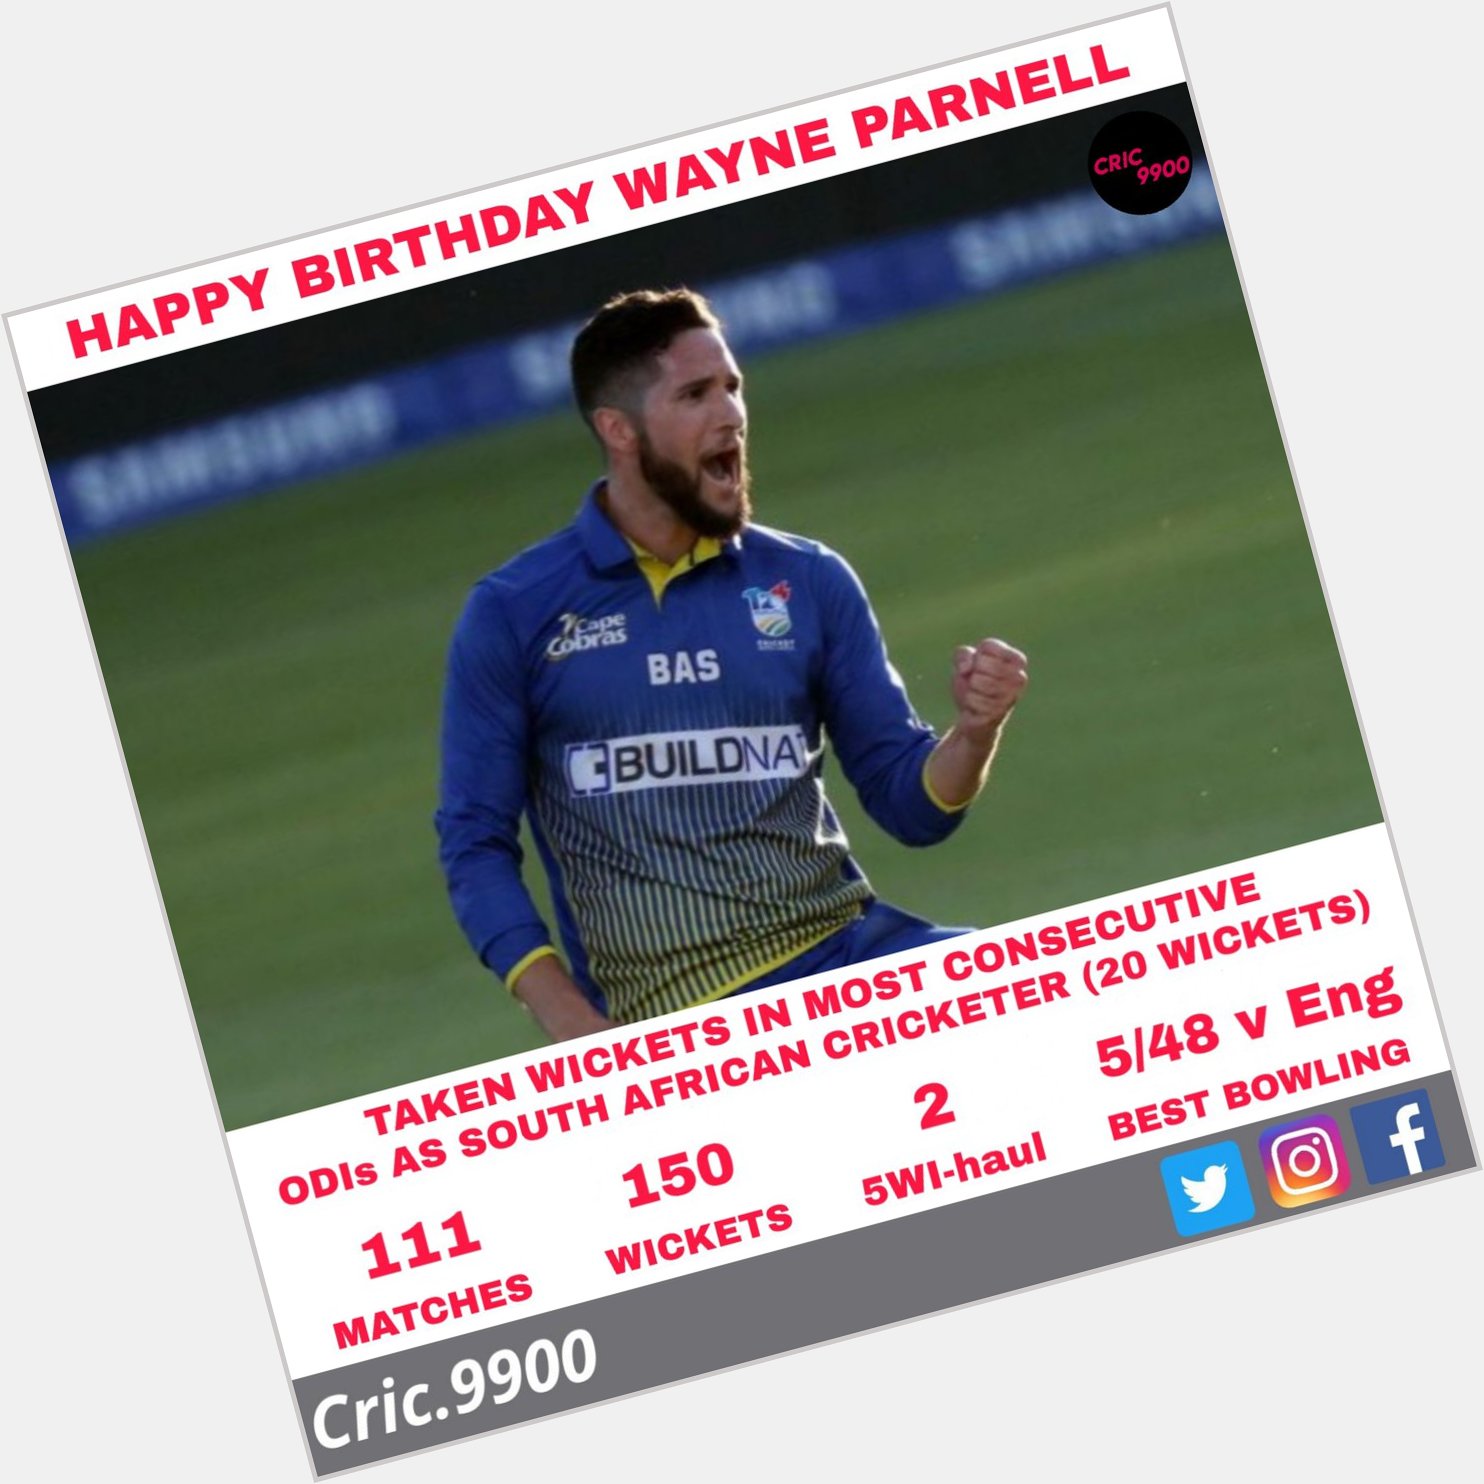 Happy birthday to South African left arm pacer Wayne Parnell   